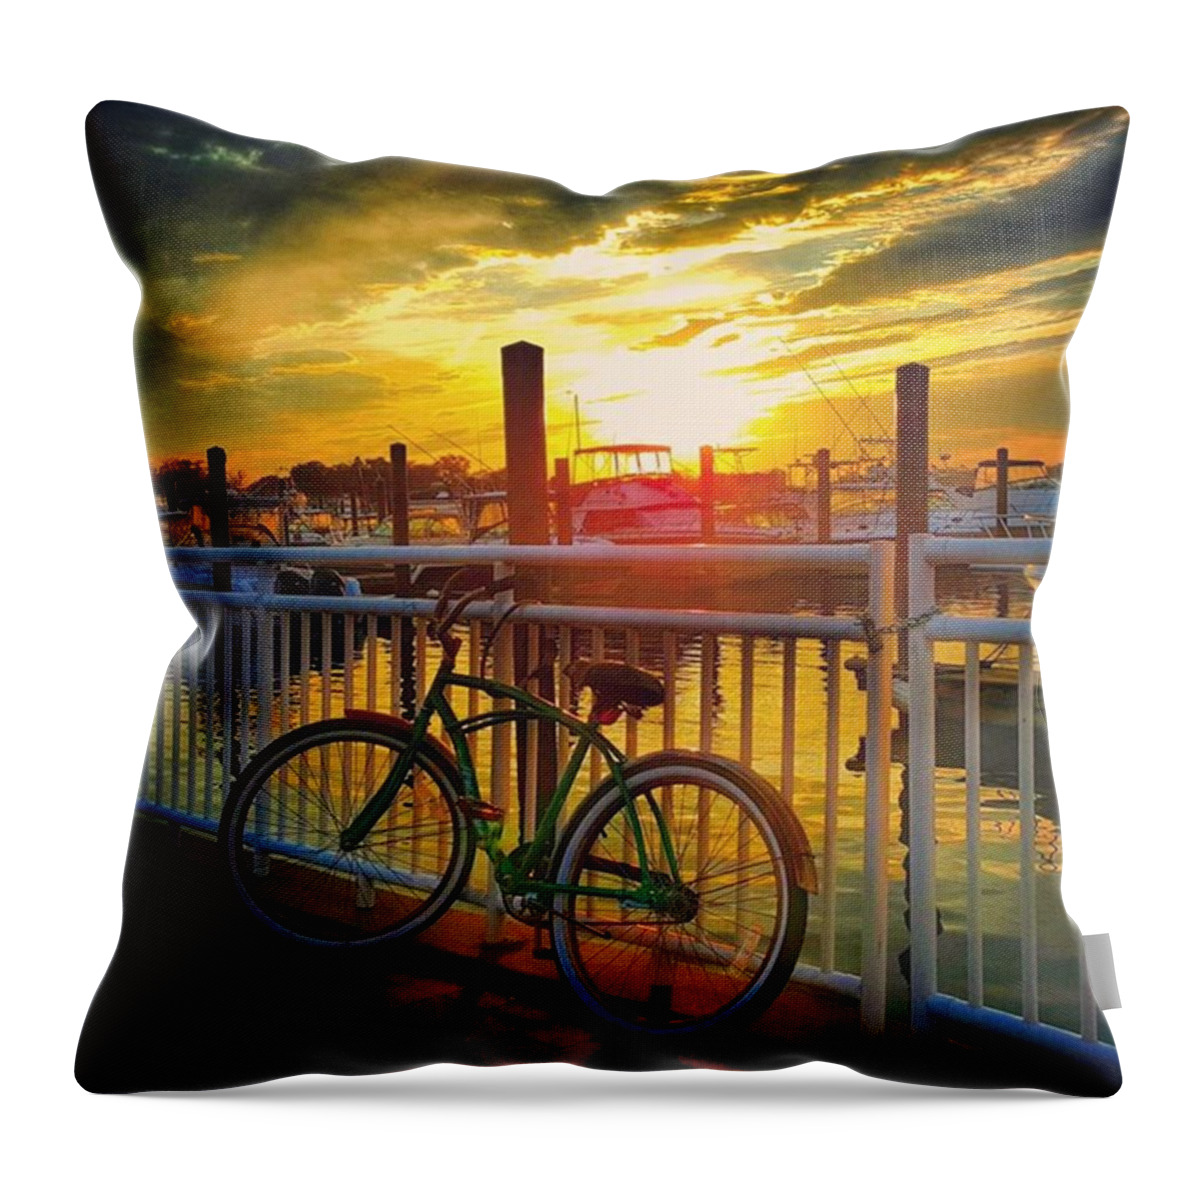 Reflection Throw Pillow featuring the photograph Sunset Ride by Lauren Fitzpatrick